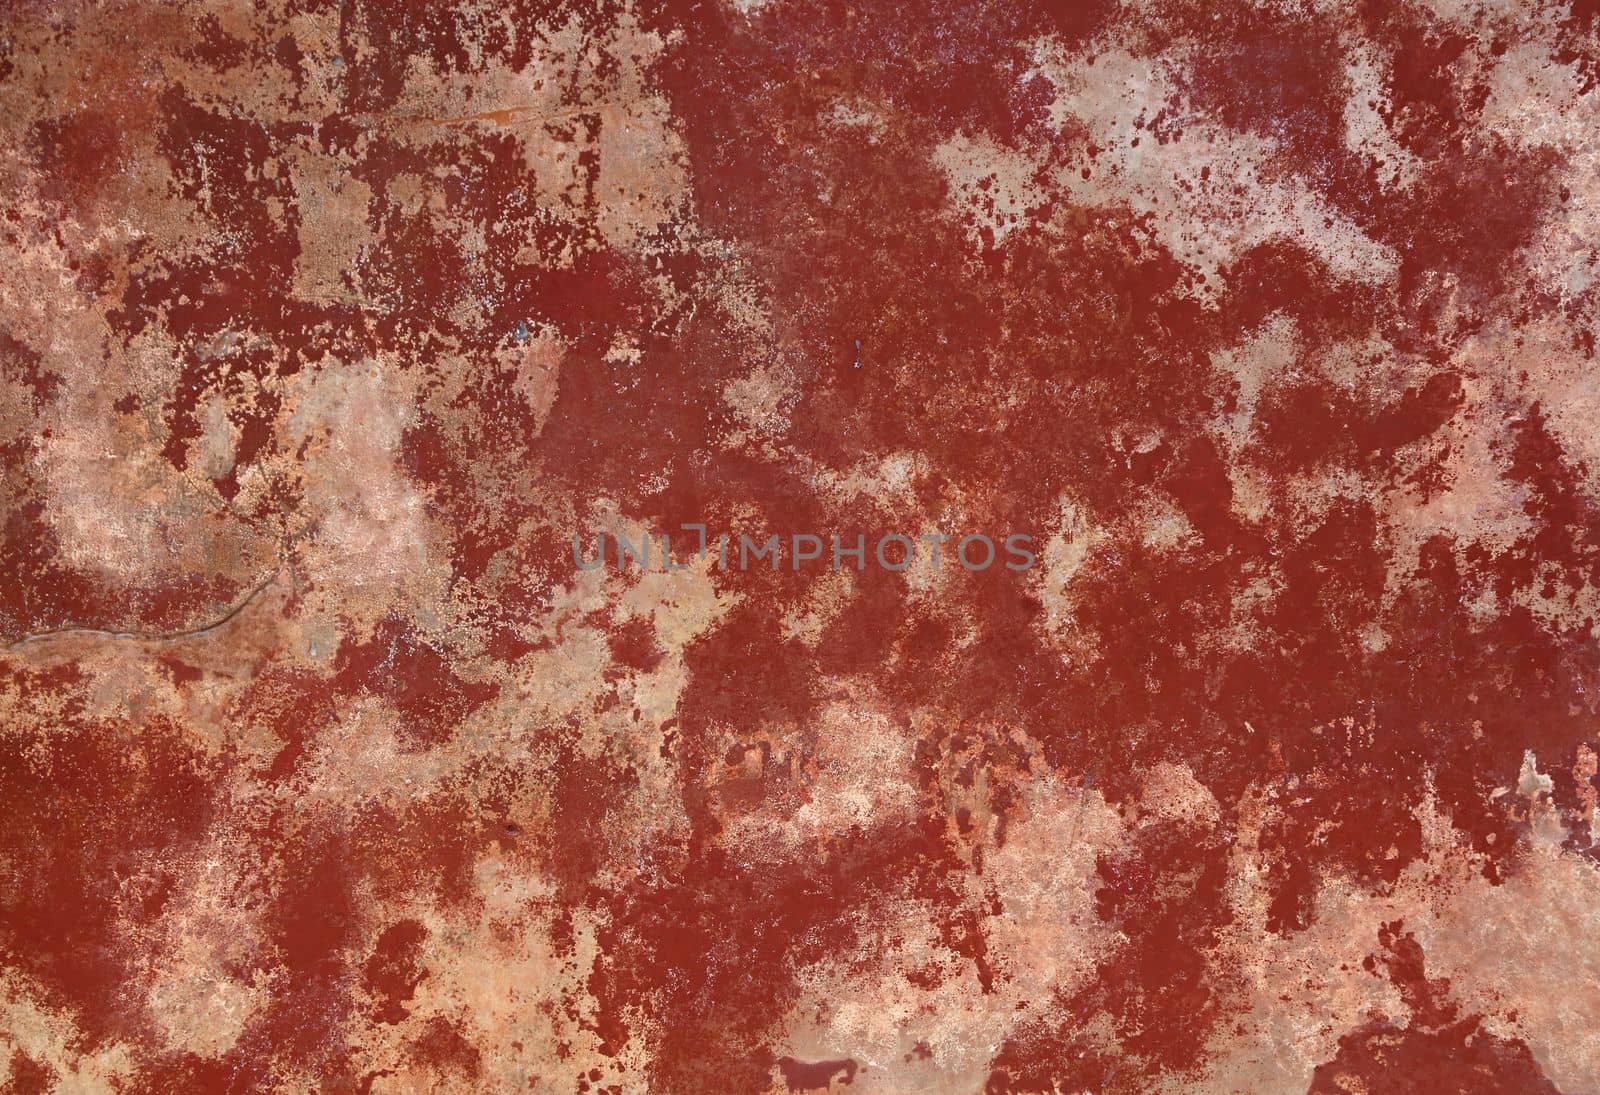 Grunge red and brown old painted concrete or stone wall background texture with stains of faded paint peel and scaling, uneven and weathered